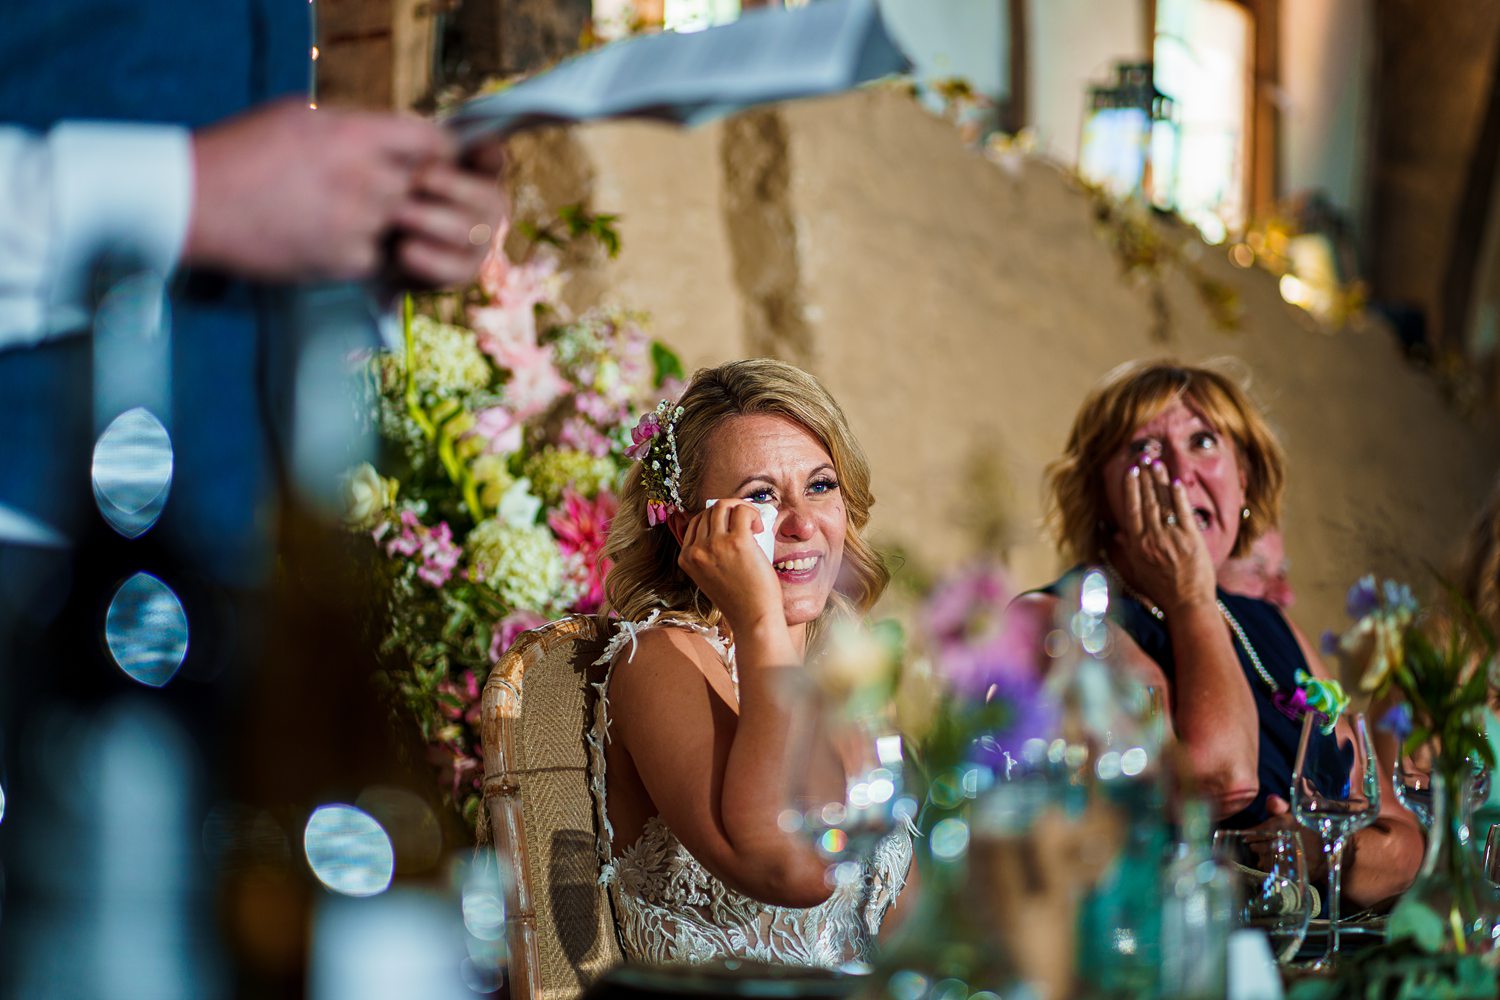 Emotional wedding guests wiping tears at reception.